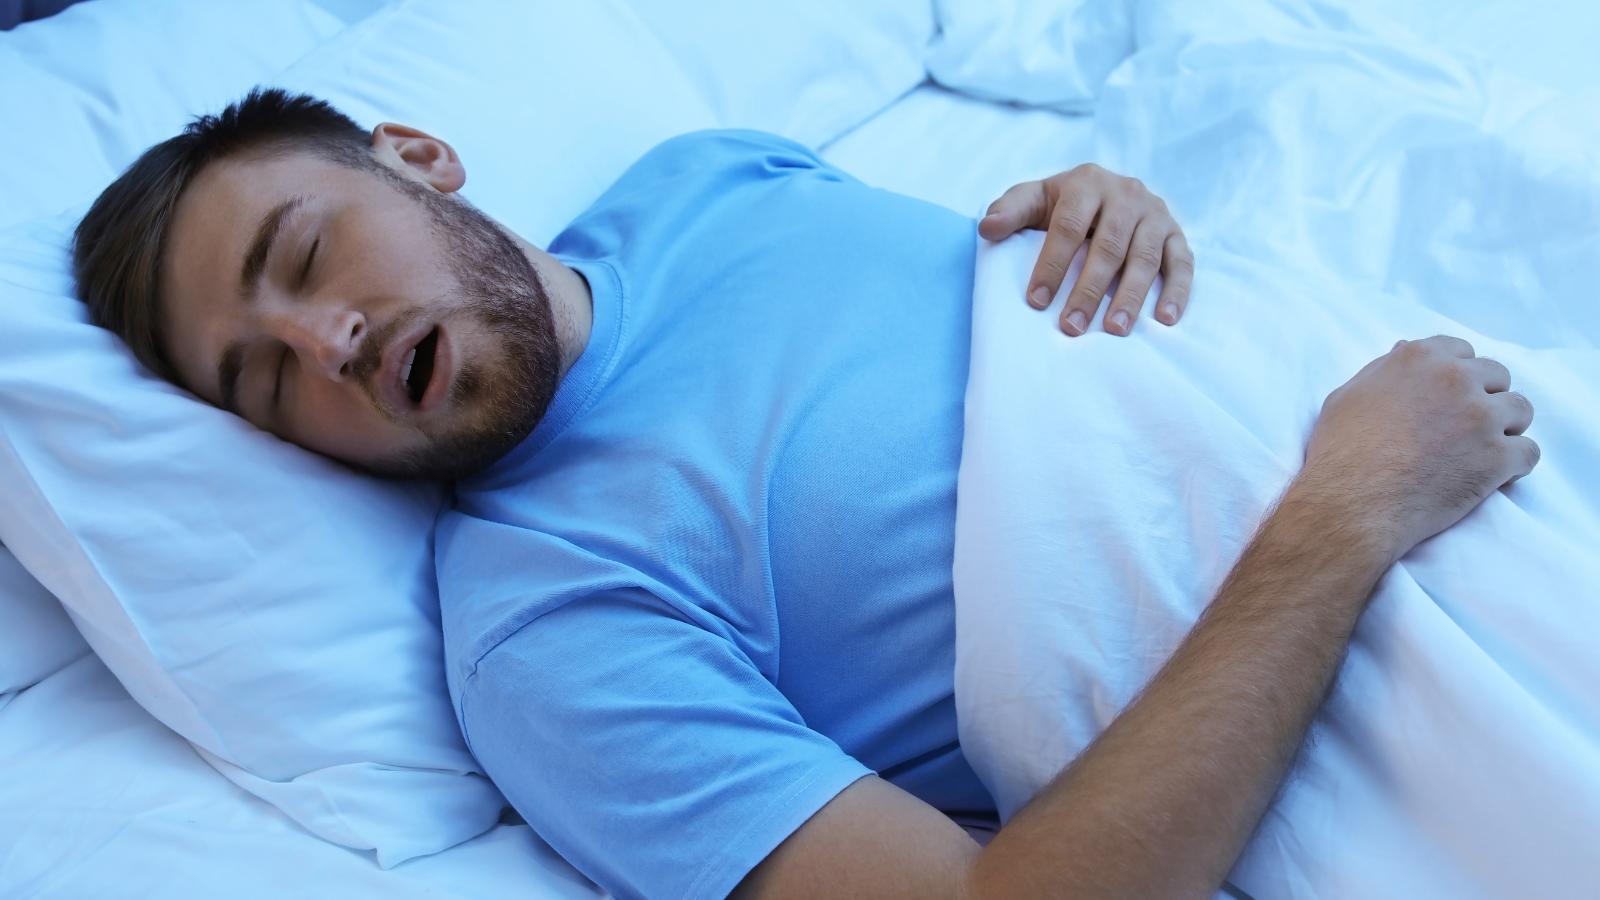 Snoring: what causes it & how can it be prevented?